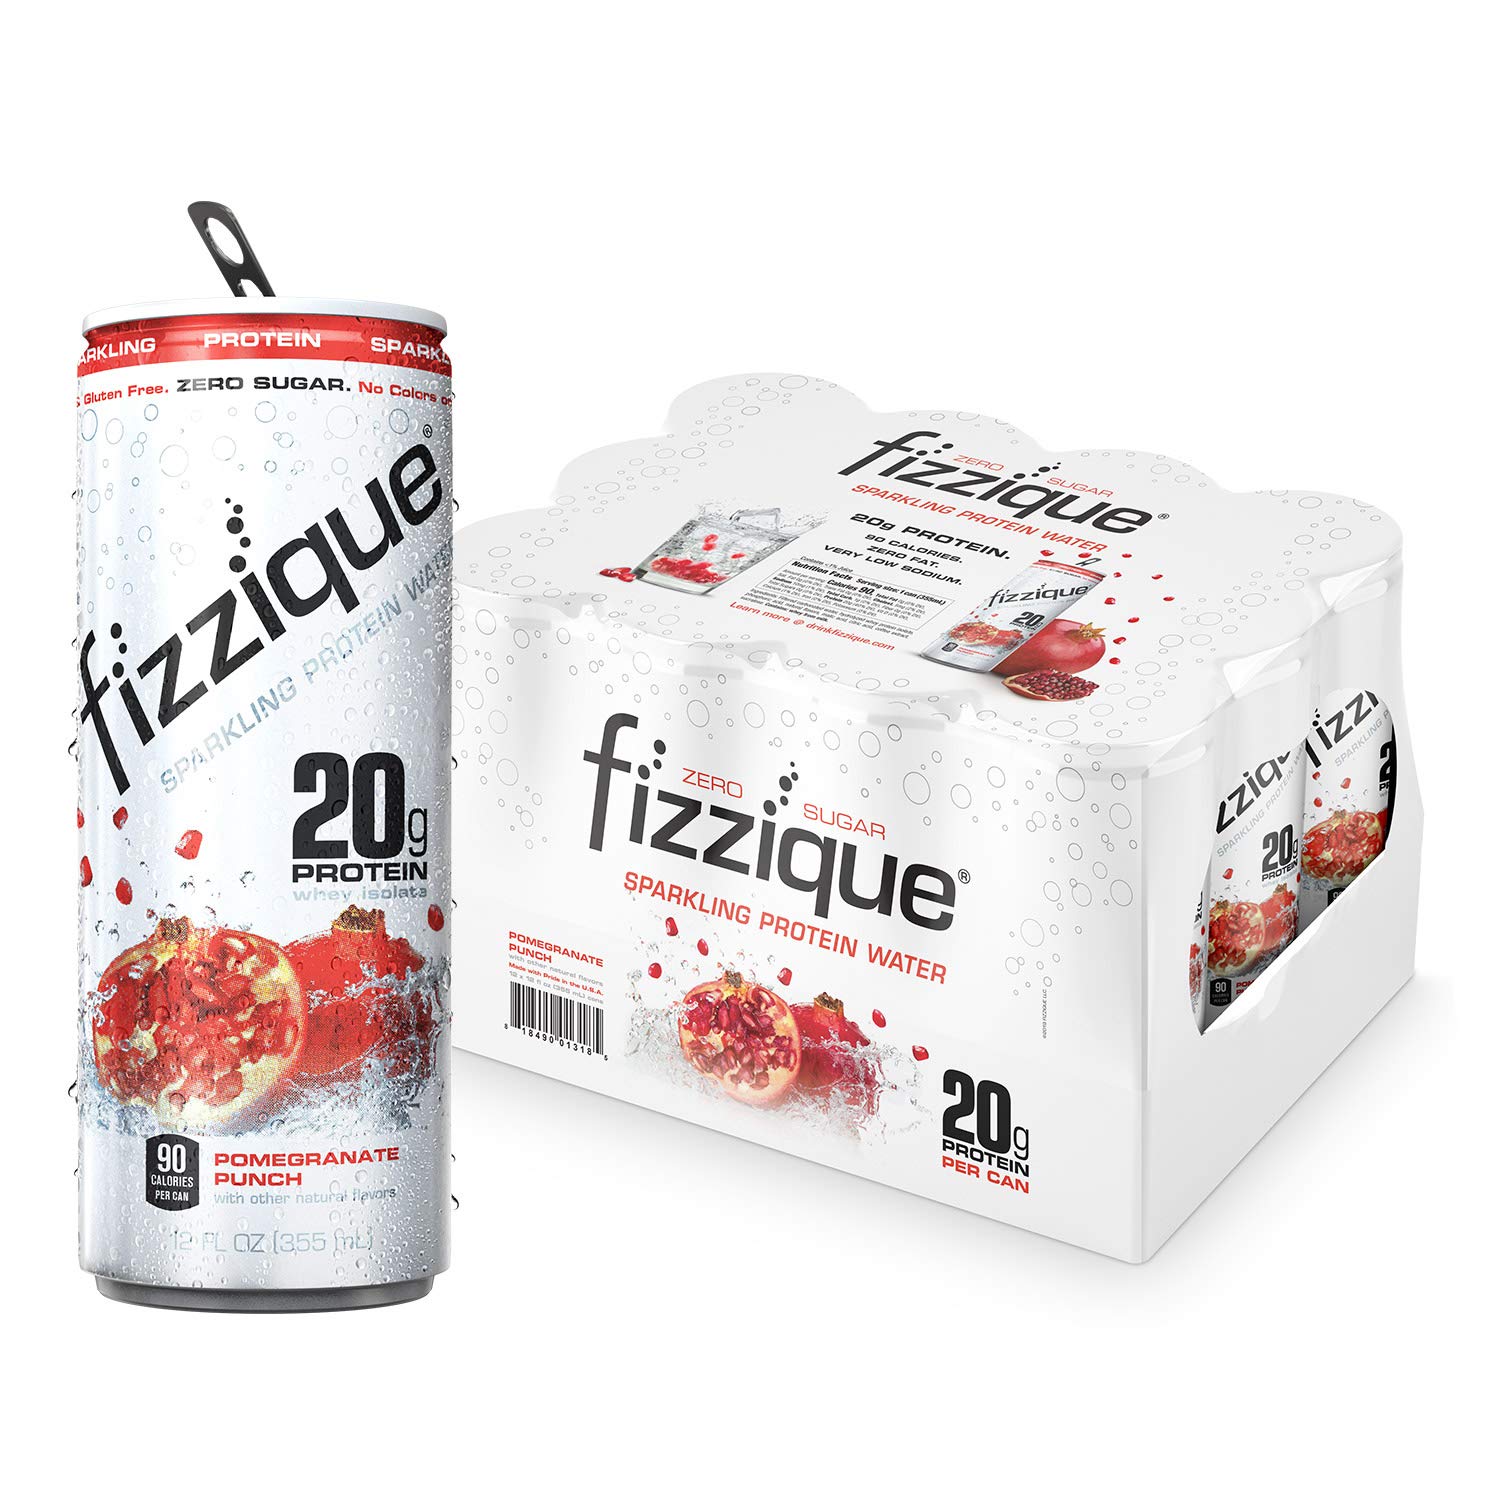 Fizzique Sparkling Protein Water Pomegranate Punch / 12x355ml